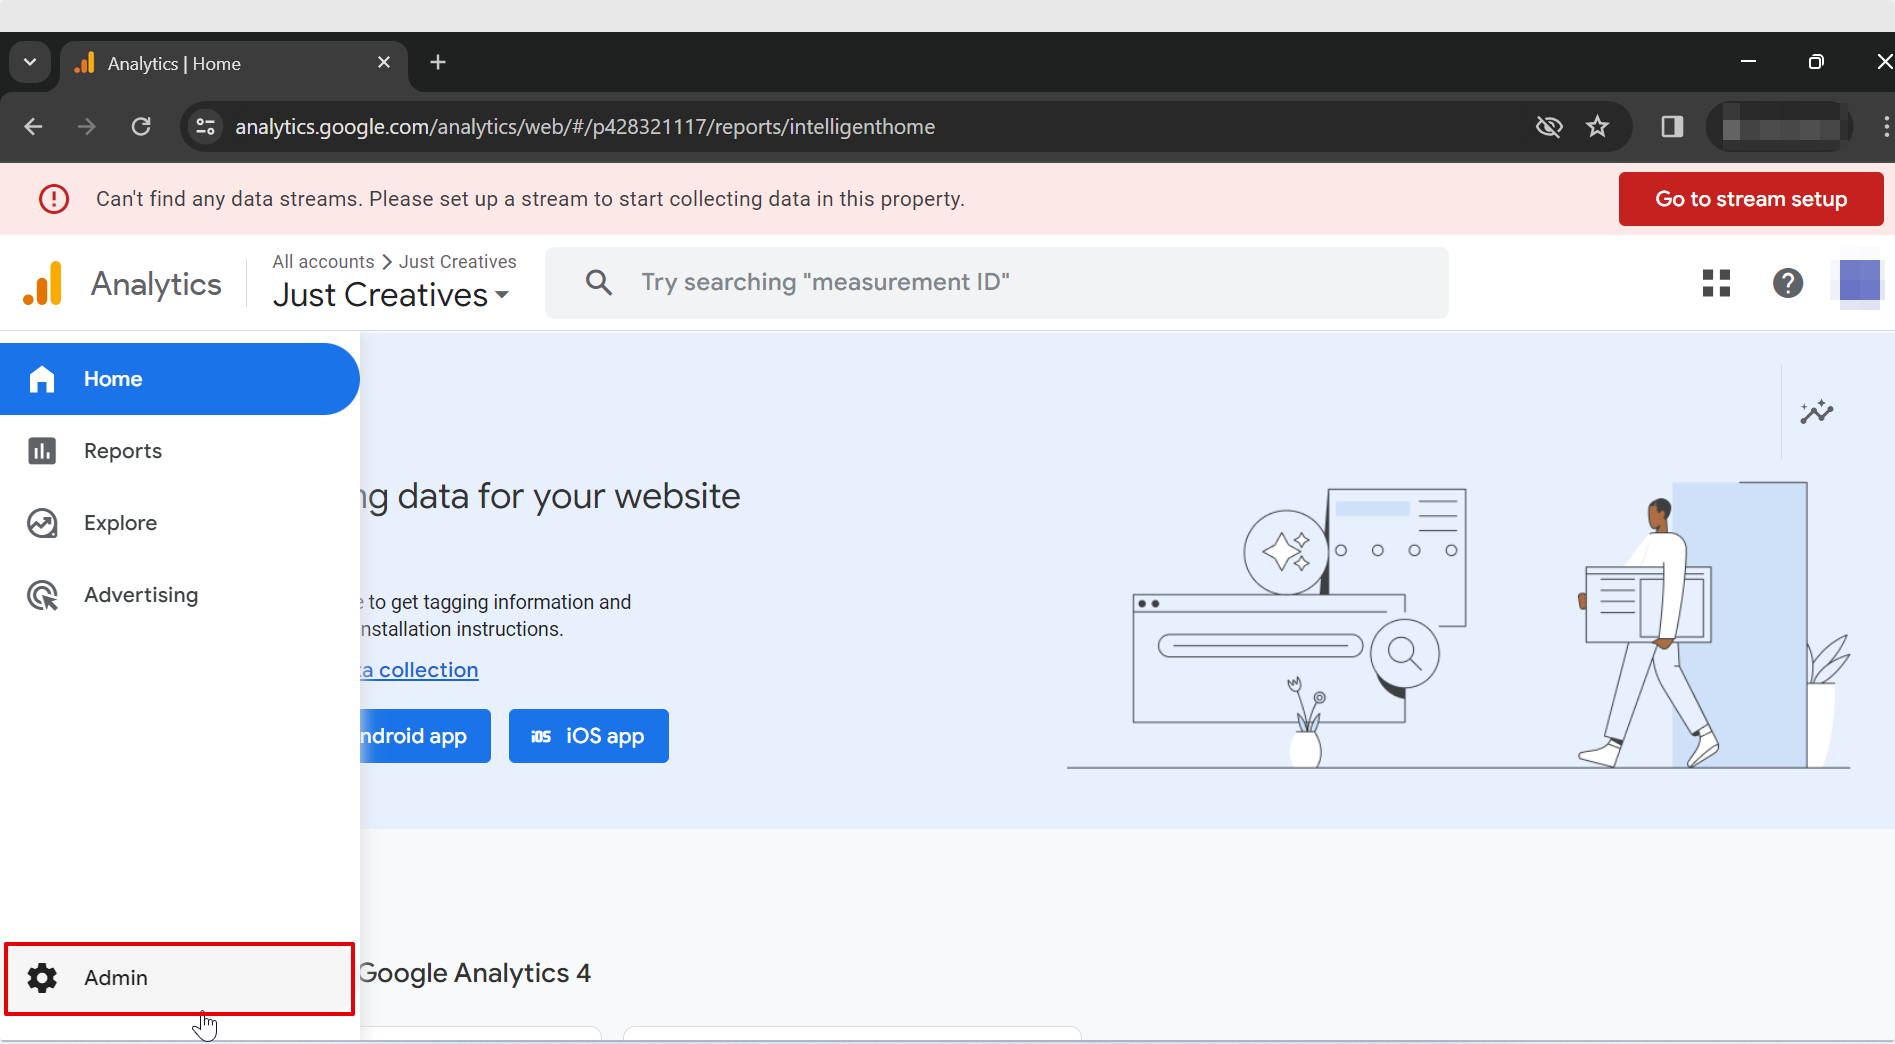 Admin Tab in Google Analytics Home Page